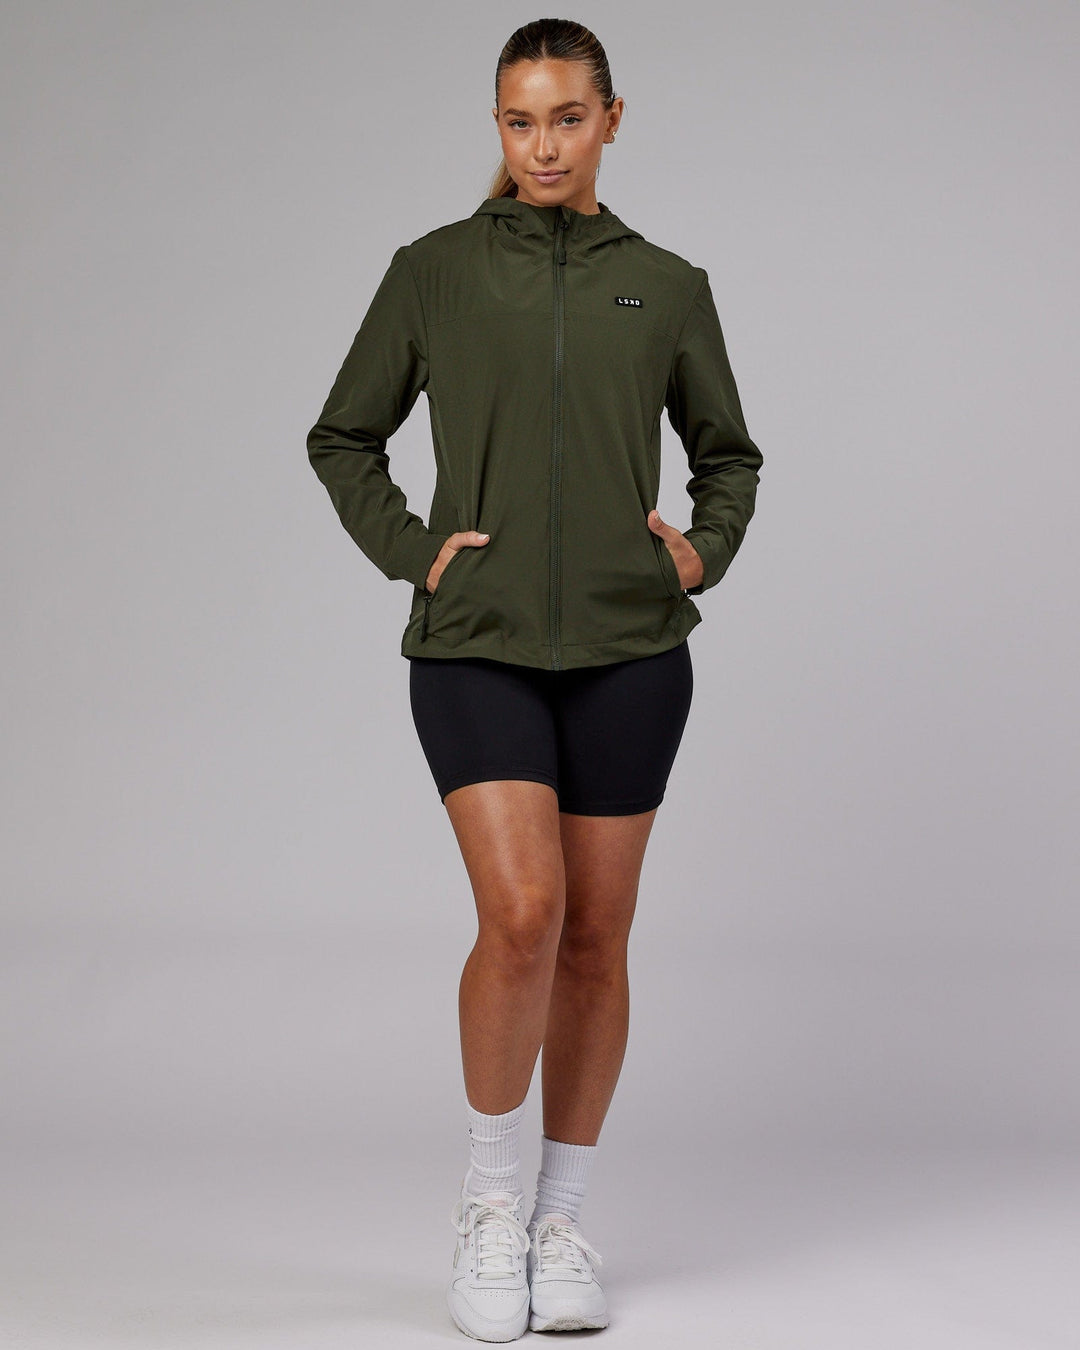 Woman wearing Womens Functional Training Jacket - Forest Night